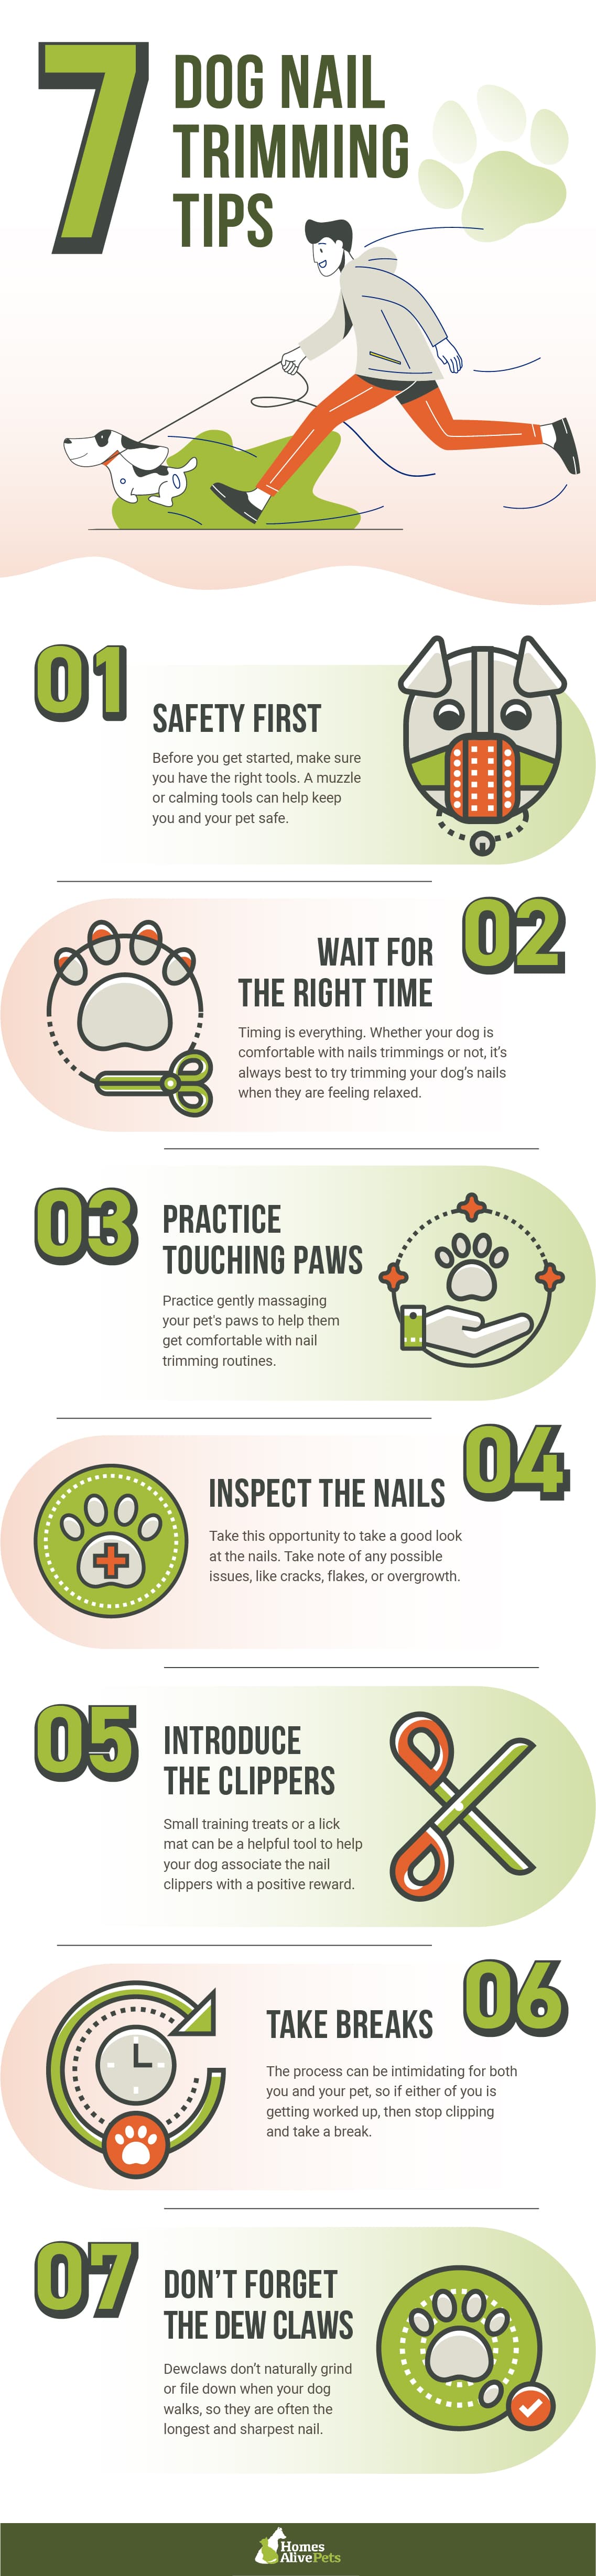 7 Dog Nail Trimming Tips - infographic